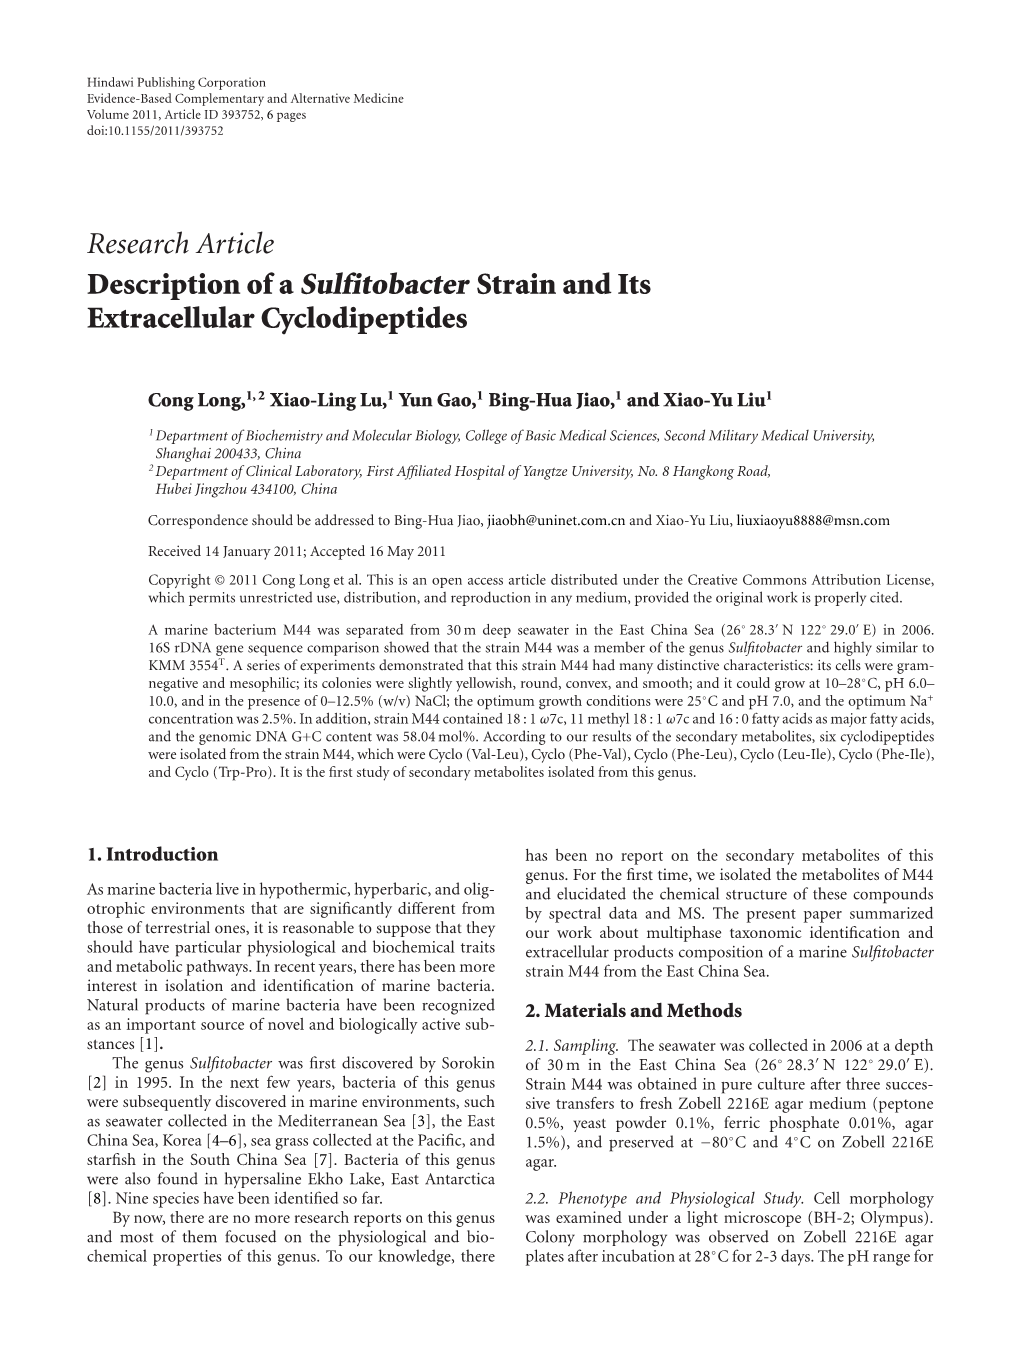 Description of a Sulfitobacter Strain and Its Extracellular Cyclodipeptides